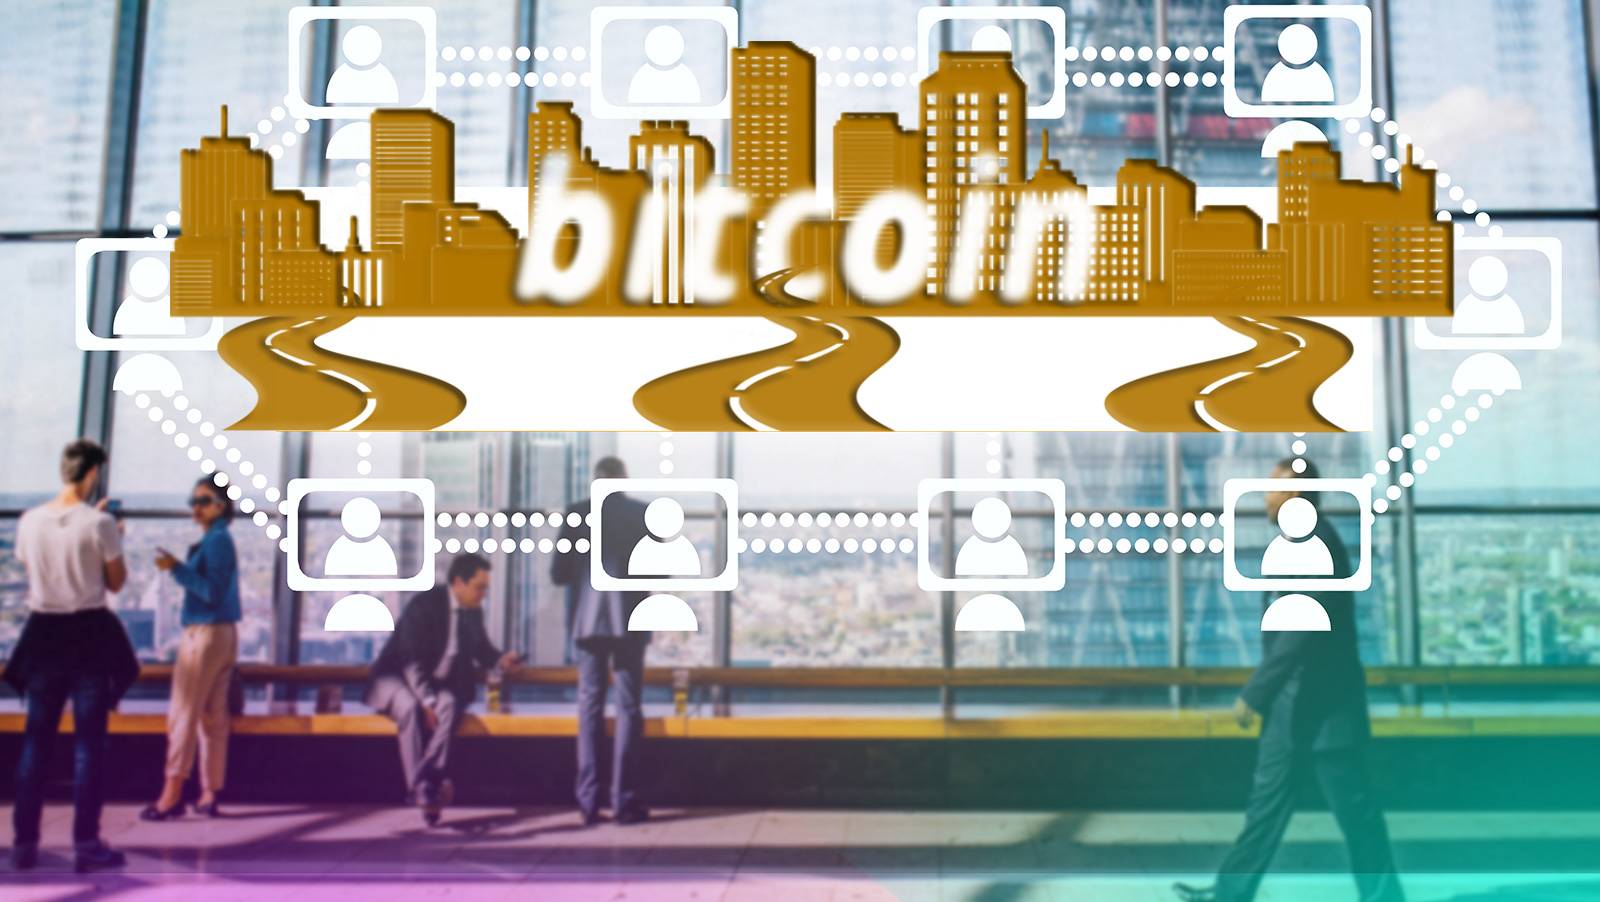 Becky’s Affiliated: Where to follow Bitcoin at iGaming industry events with Eric Benz